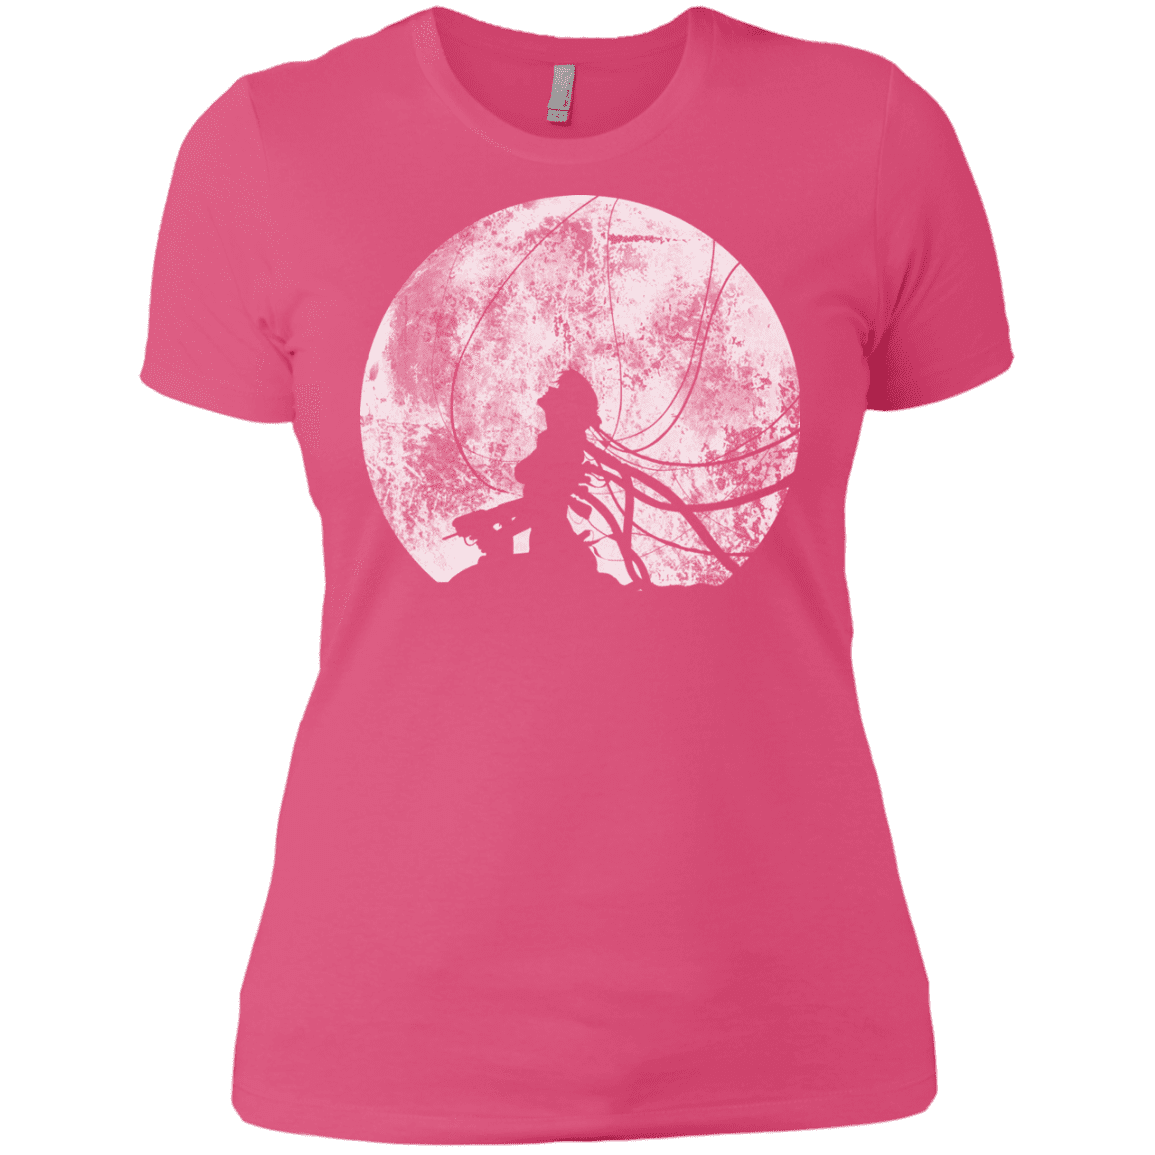 T-Shirts Hot Pink / X-Small Shell of a Ghost Women's Premium T-Shirt